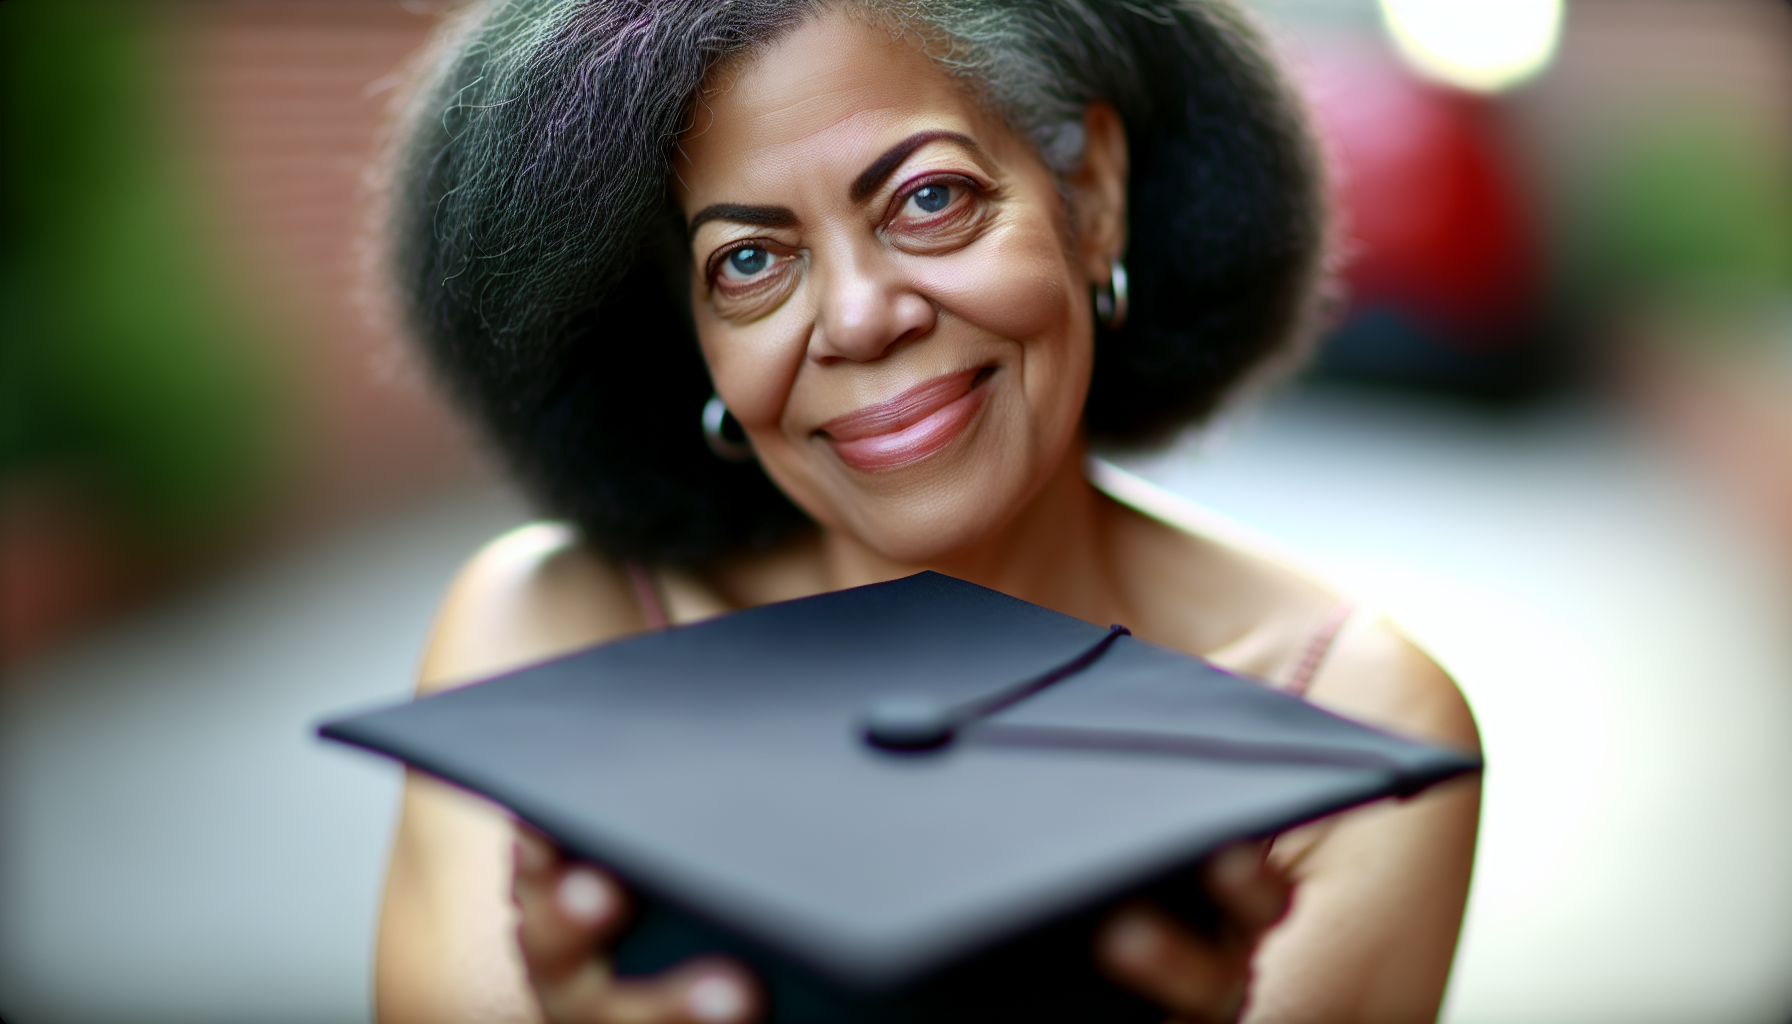 A person holding a graduation cap, symbolizing formal education and continuous learning